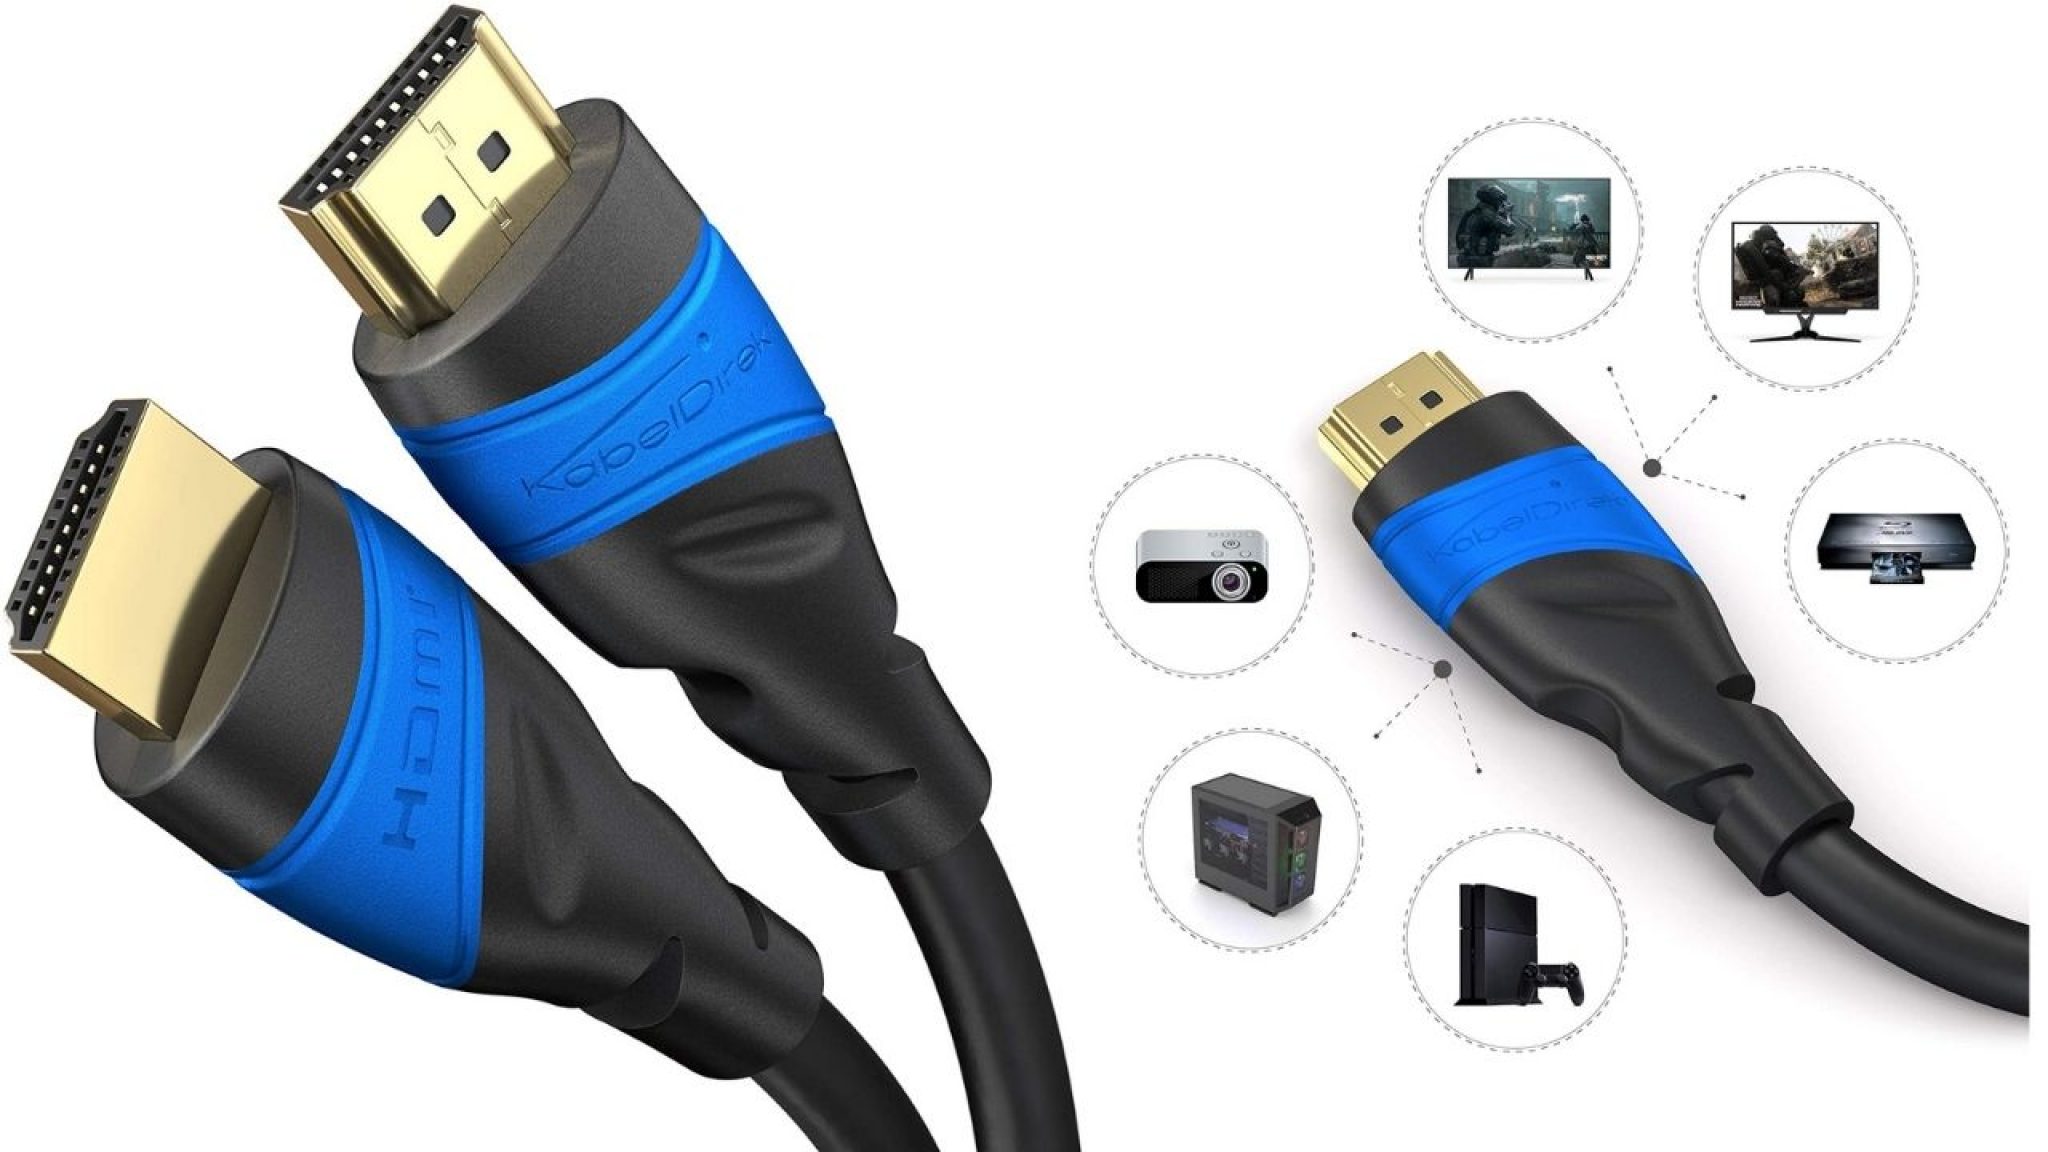 Best HDMI Cables For 4k Gaming for August 2021